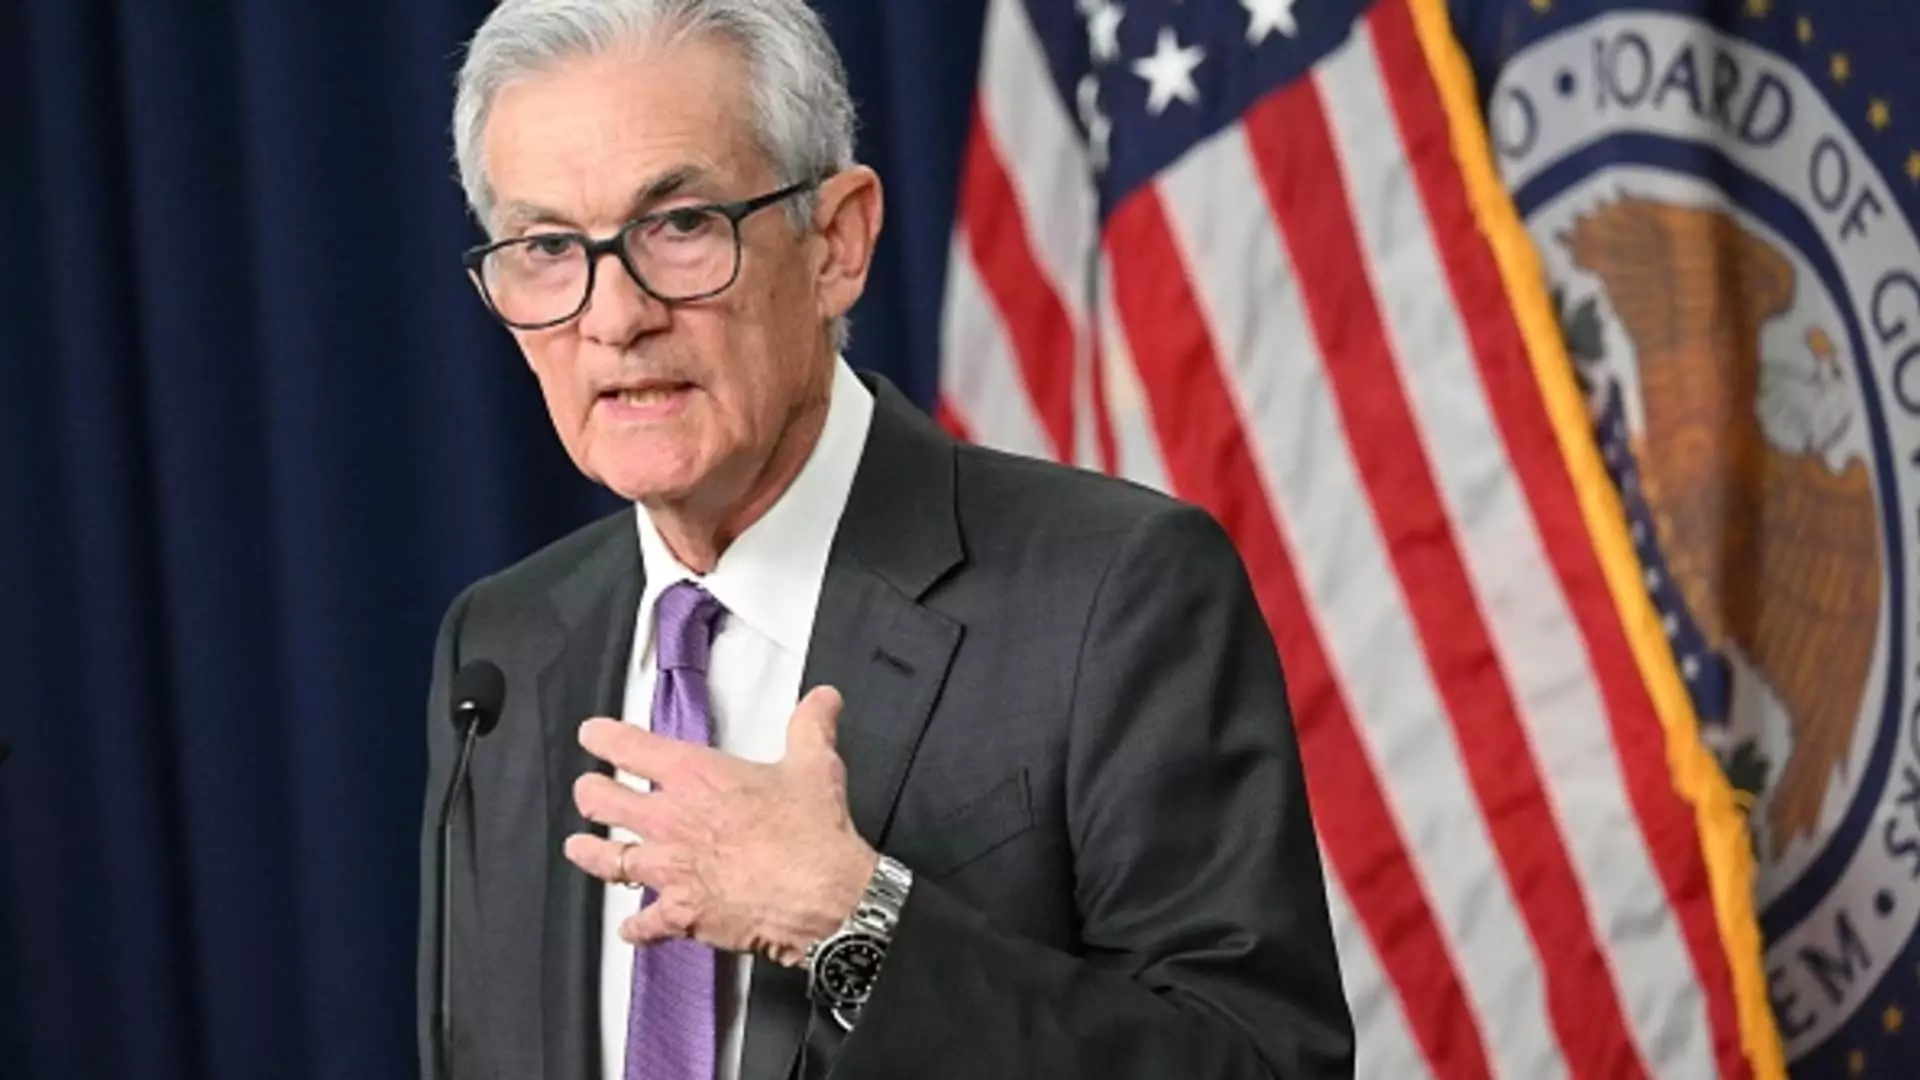 The Federal Reserve Holds Interest Rates Steady Amid Inflation Concerns